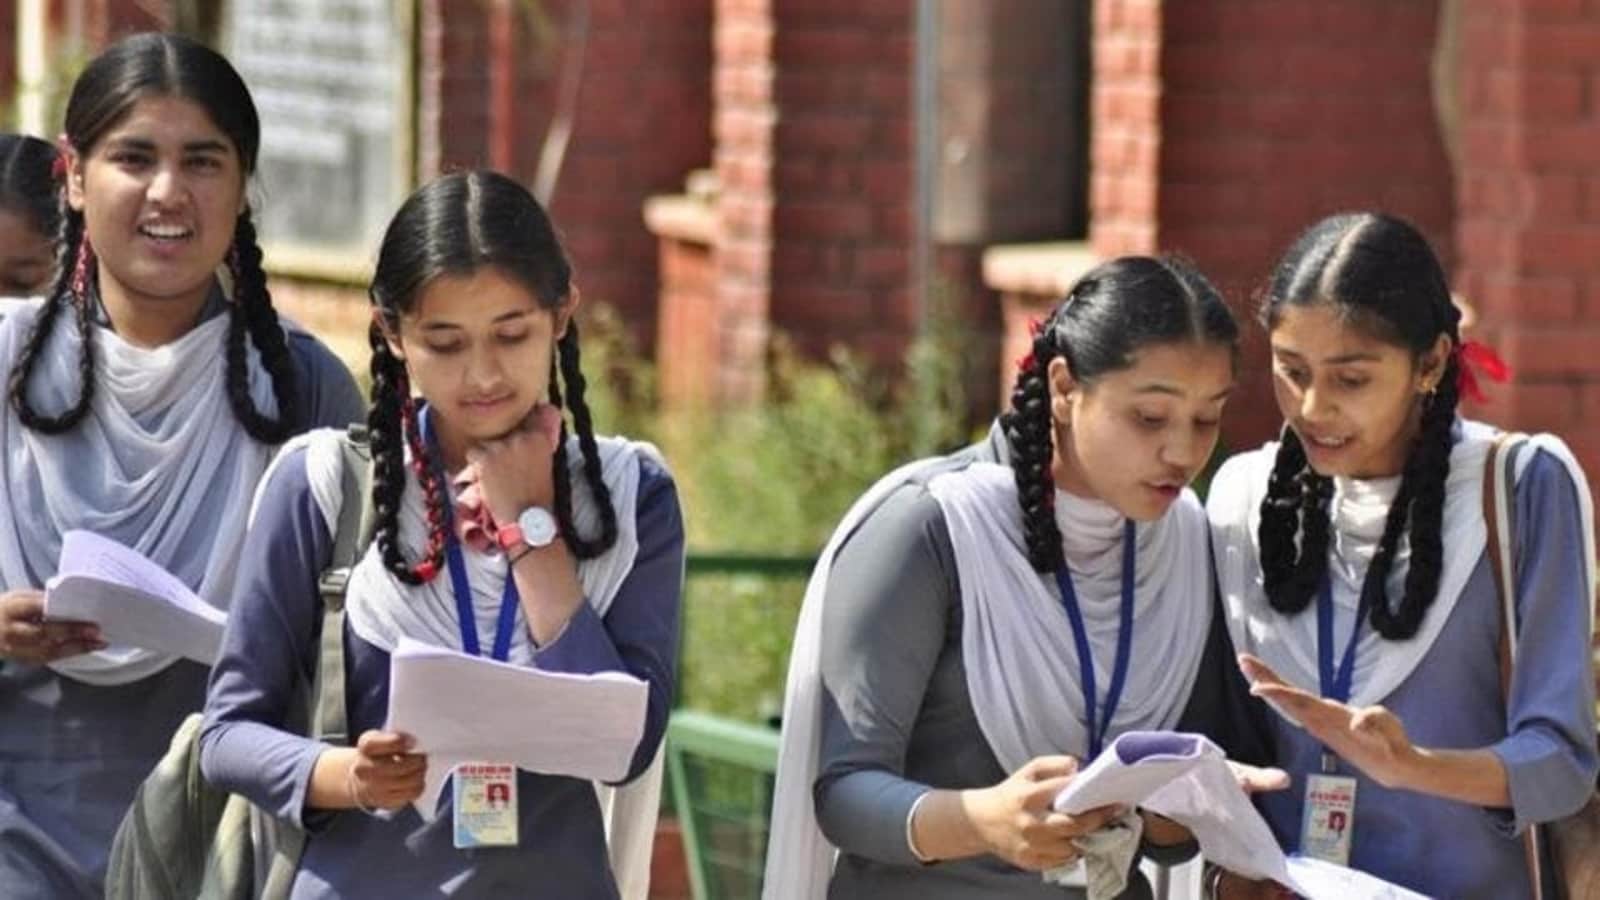 Bihar Board (BSEB) Inter exams from tomorrow, 80K students to appear in Patna